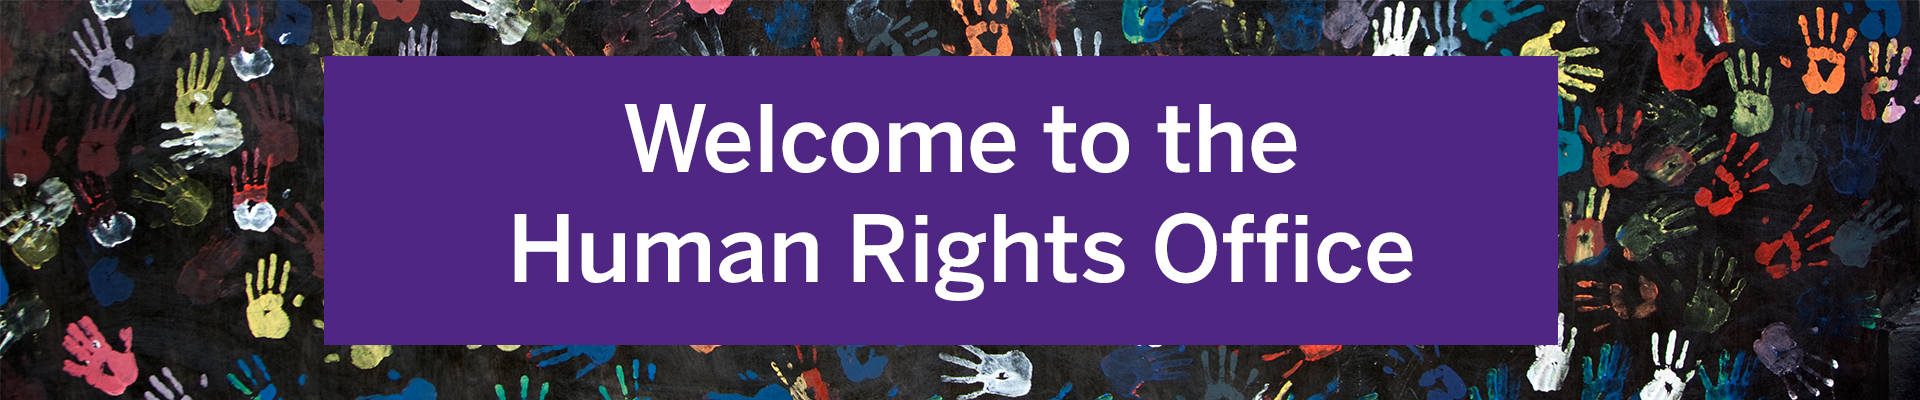 Welcome to the Human Rights Office